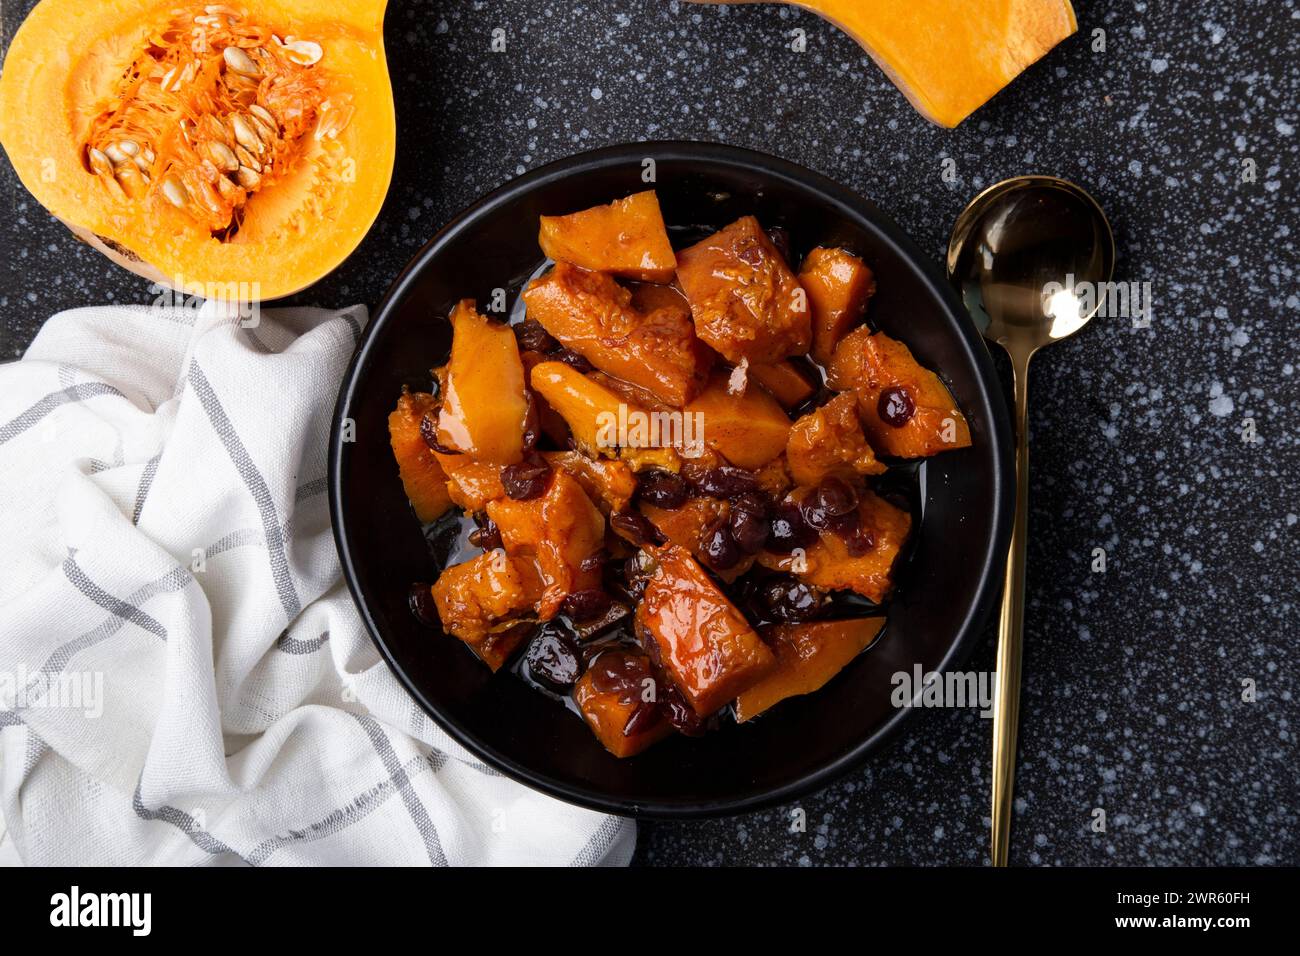 Autumn Delight - Roasted Pumpkin with Cranberries and Spices. Stock Photo